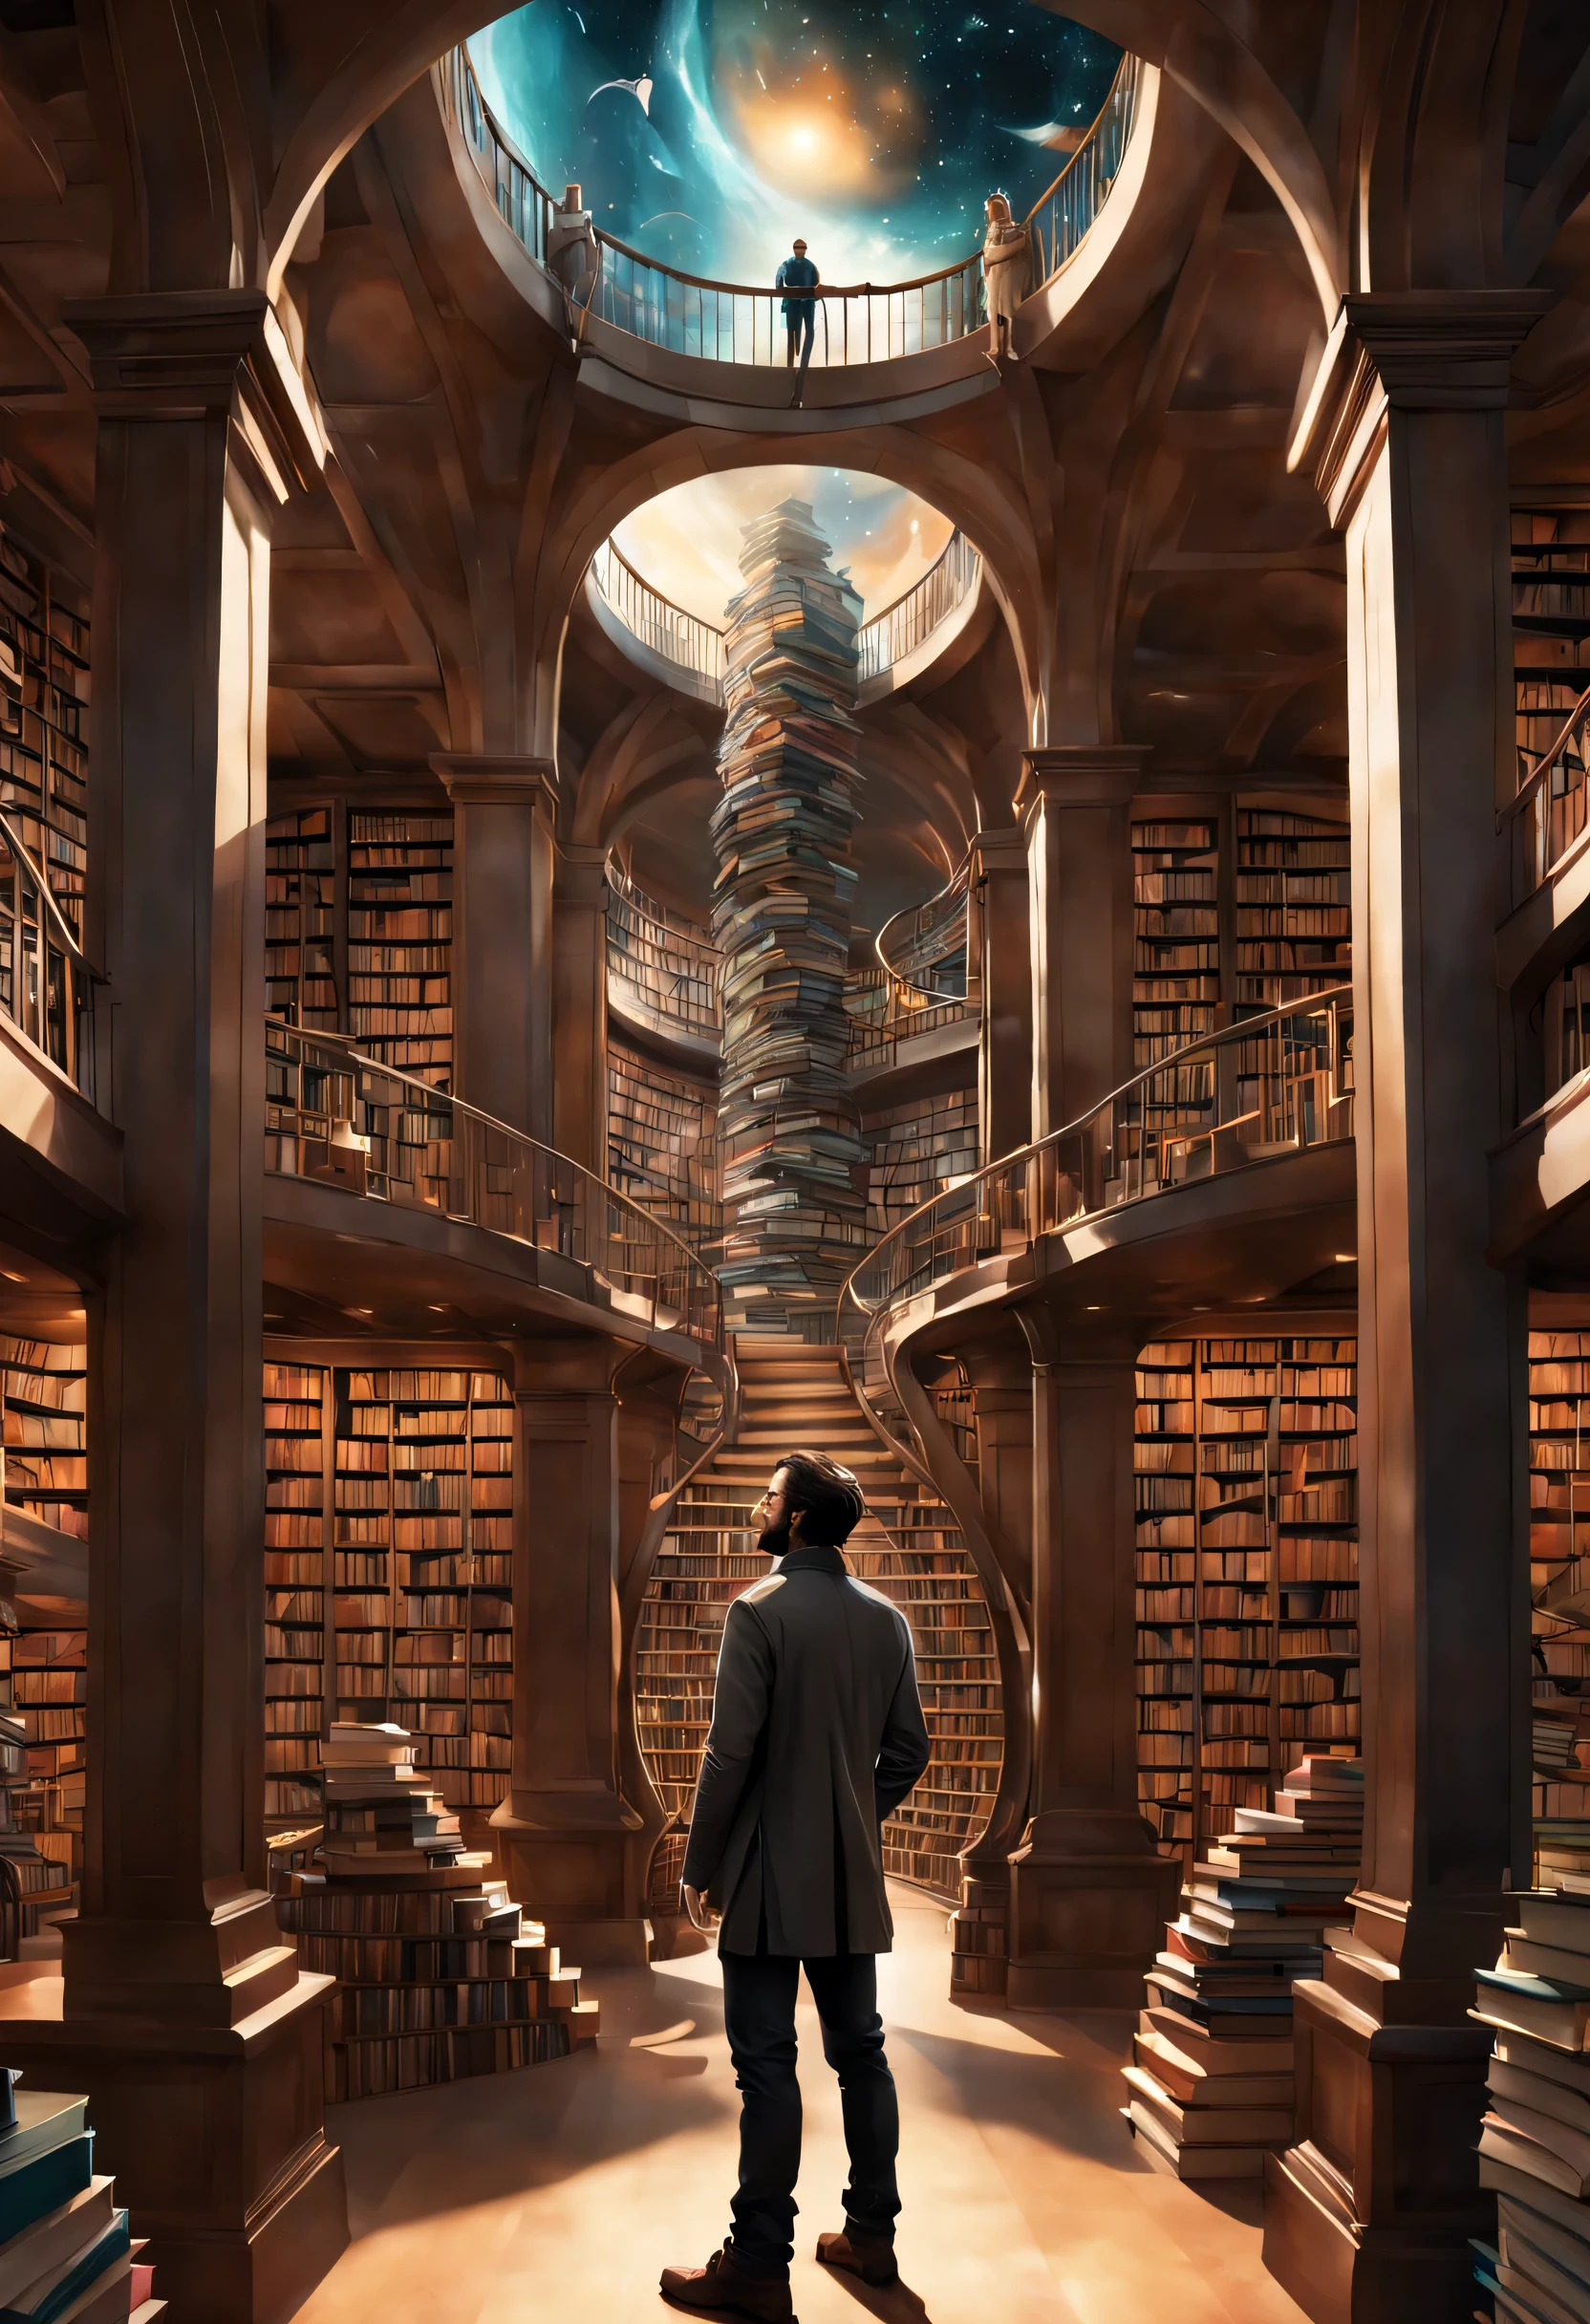 image of a man standing in a library with books, endless books, borne space library artwork, books cave, fantasy book illustration, spiral shelves full of books, infinite celestial library, an eternal library, gothic epic library concept, magic library, japanese sci - fi books art, beeple and jean giraud, books all over the place
